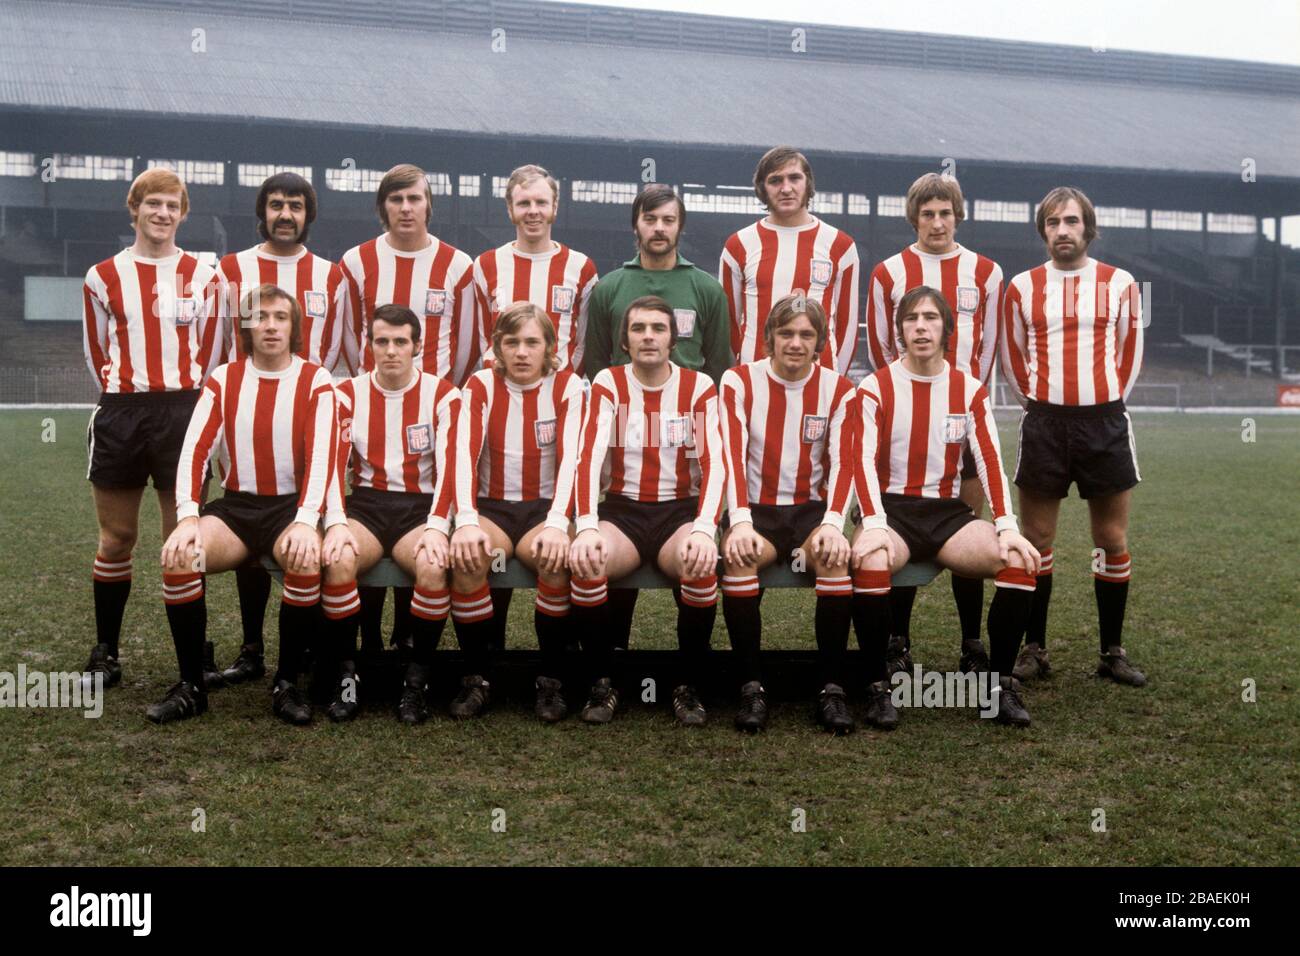 Brentford Team group for the 1971-72 season in League Division Four. (top l-r) Paul Bence, Peter Gelson, Brian Turner, Alan Nelmes, Gordon Phillips, John O'Mara, Mike Allen and Alan Hawley. (front l-r) Gordon Neilson, John Docherty, Steve Tom, Bobby Ross, Terry Scales and Jackie Graham. Stock Photo